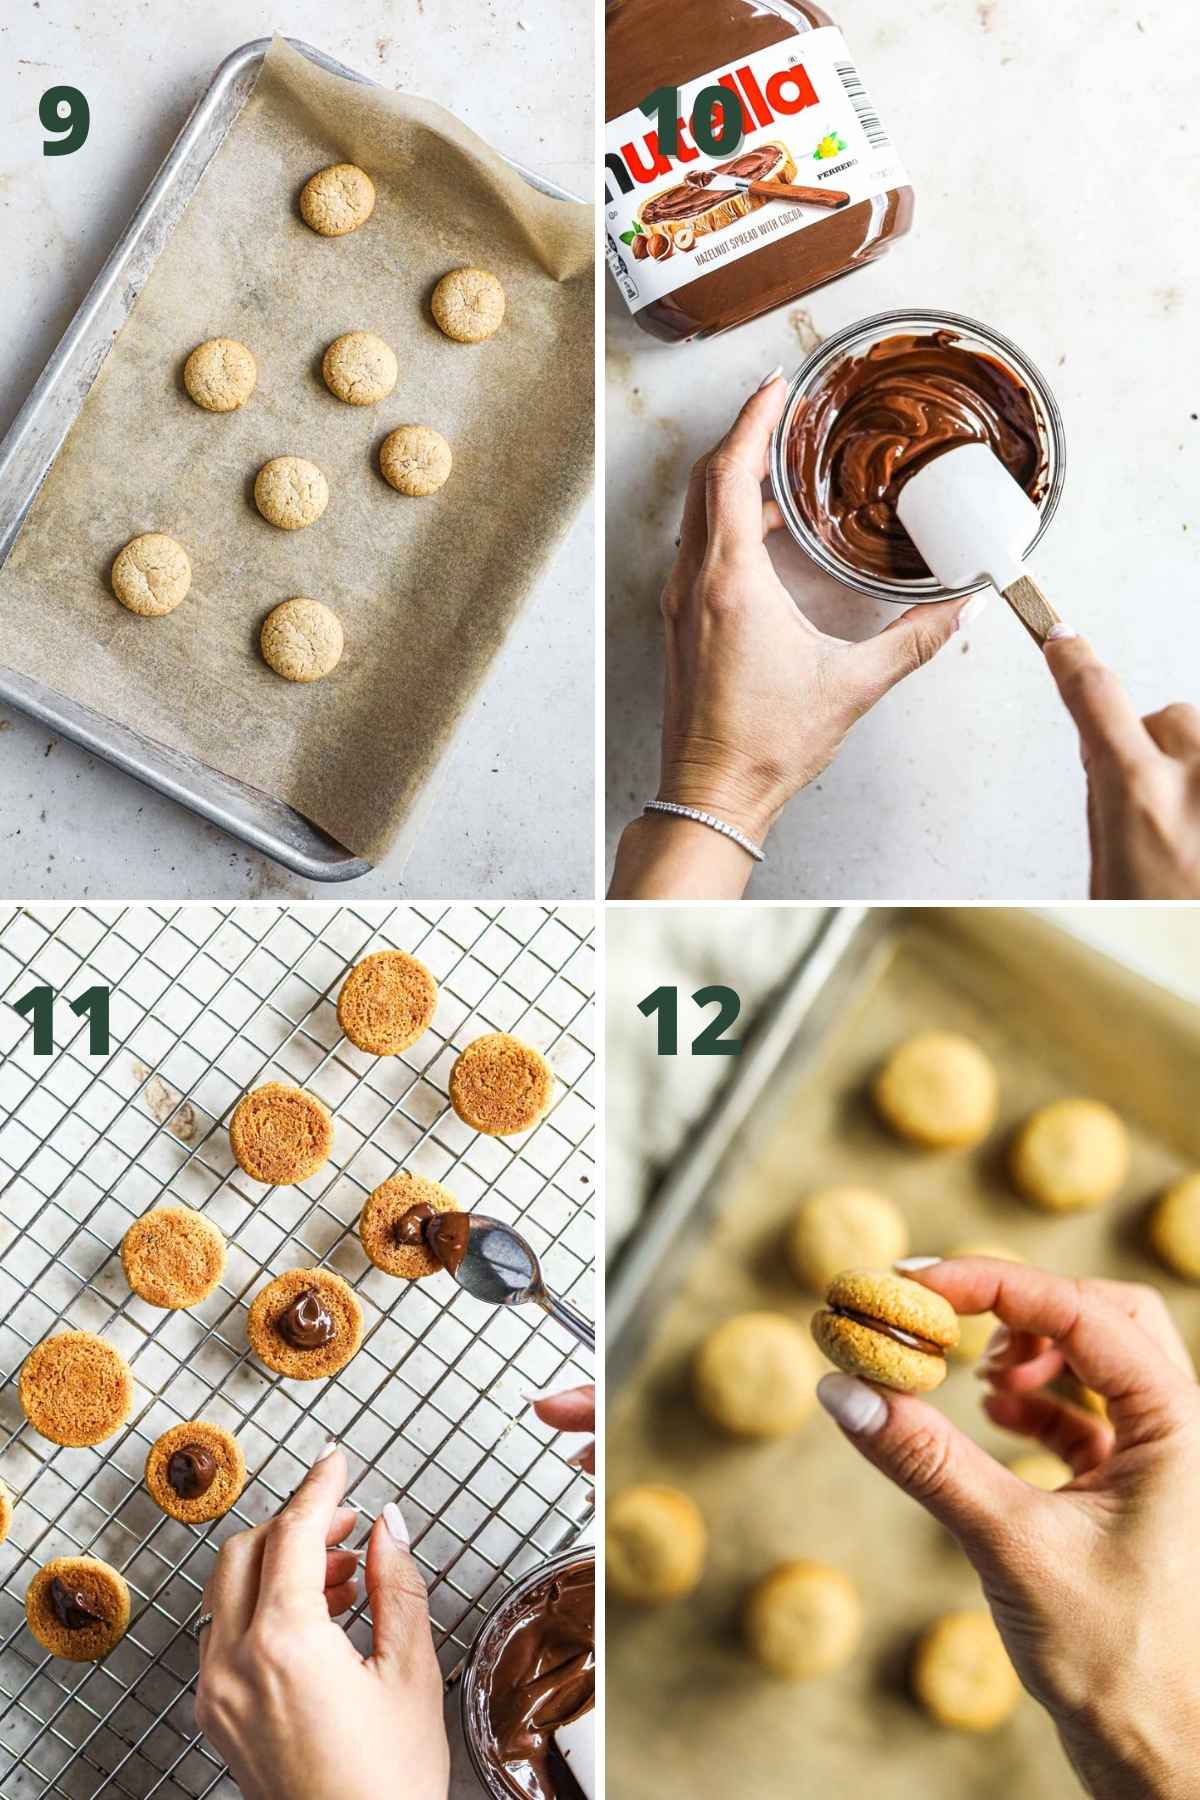 Steps to make baci di dama, including baking the cookies, melting the dark chocolate chips with Nutella, spooning Nutella onto the cookies, and forming the cookies into sandwiches.